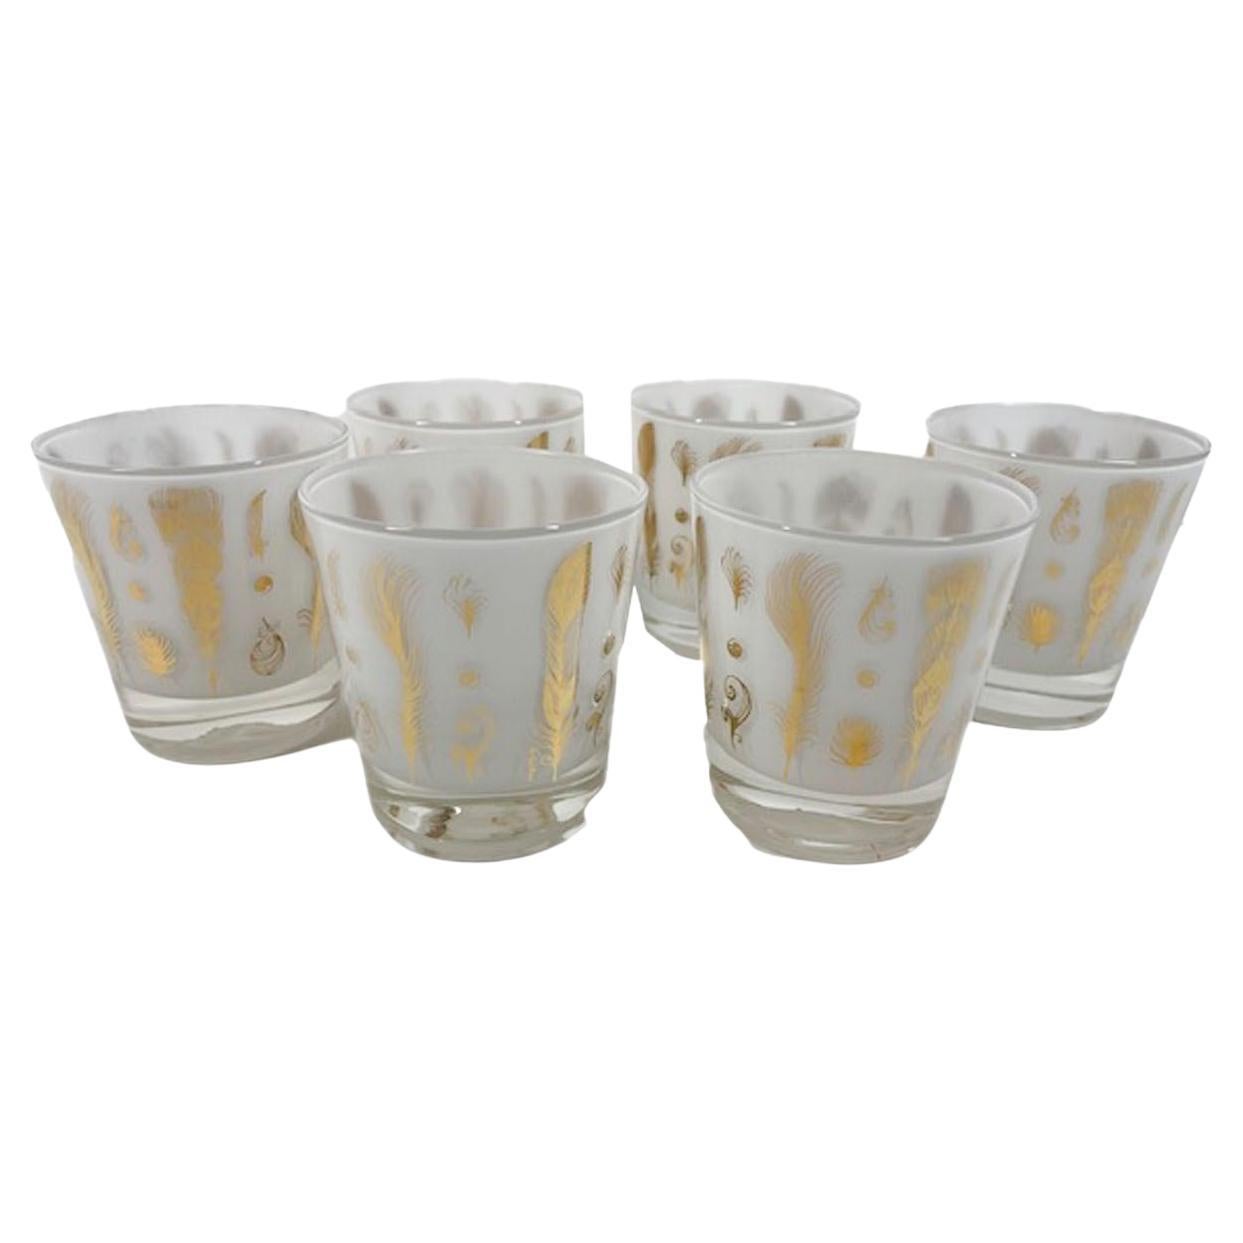 Six mid-century old fashioned glasses designed by Fred Press with 22 karat gold feathers on clear glass with frosted white interiors.